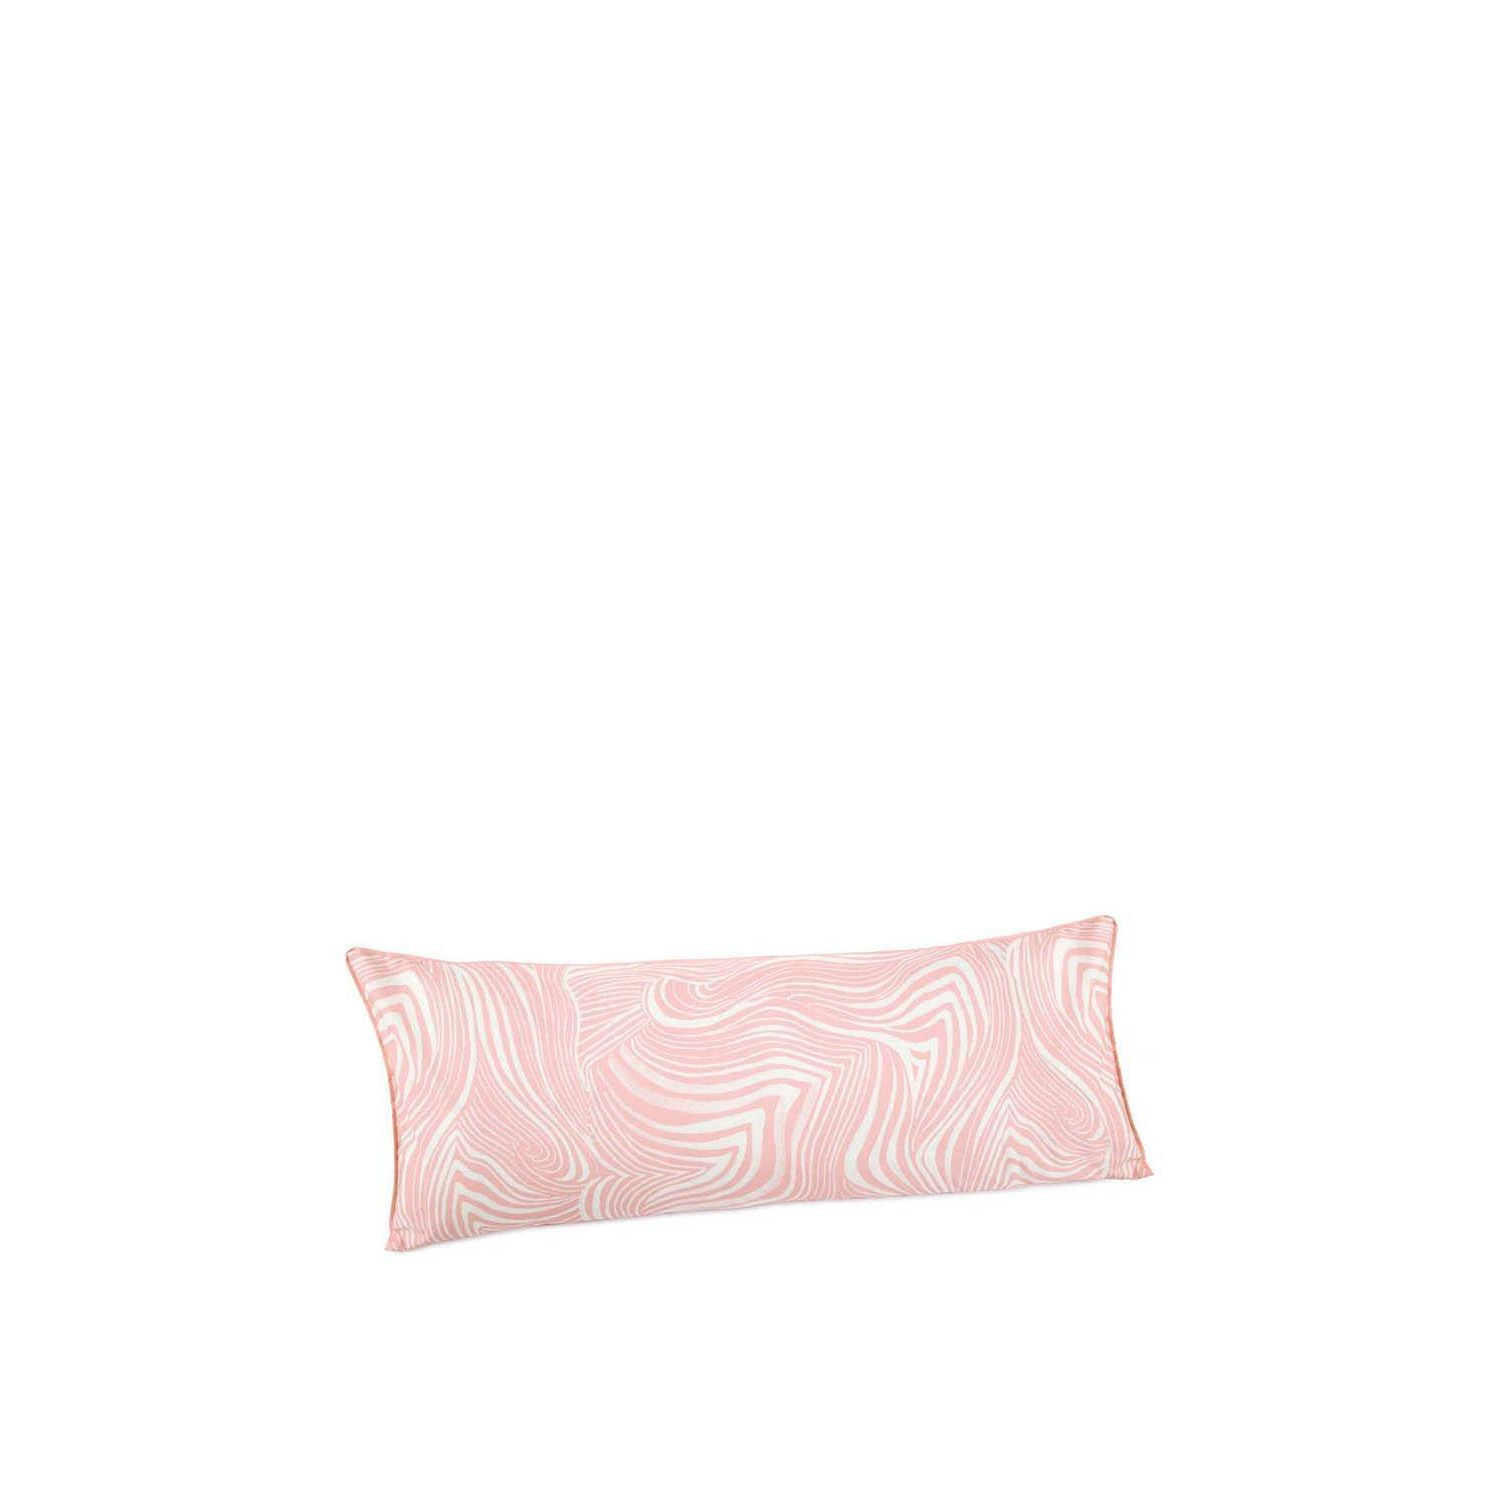 Pink Zebra Marble Pink Body Pillow - image 1